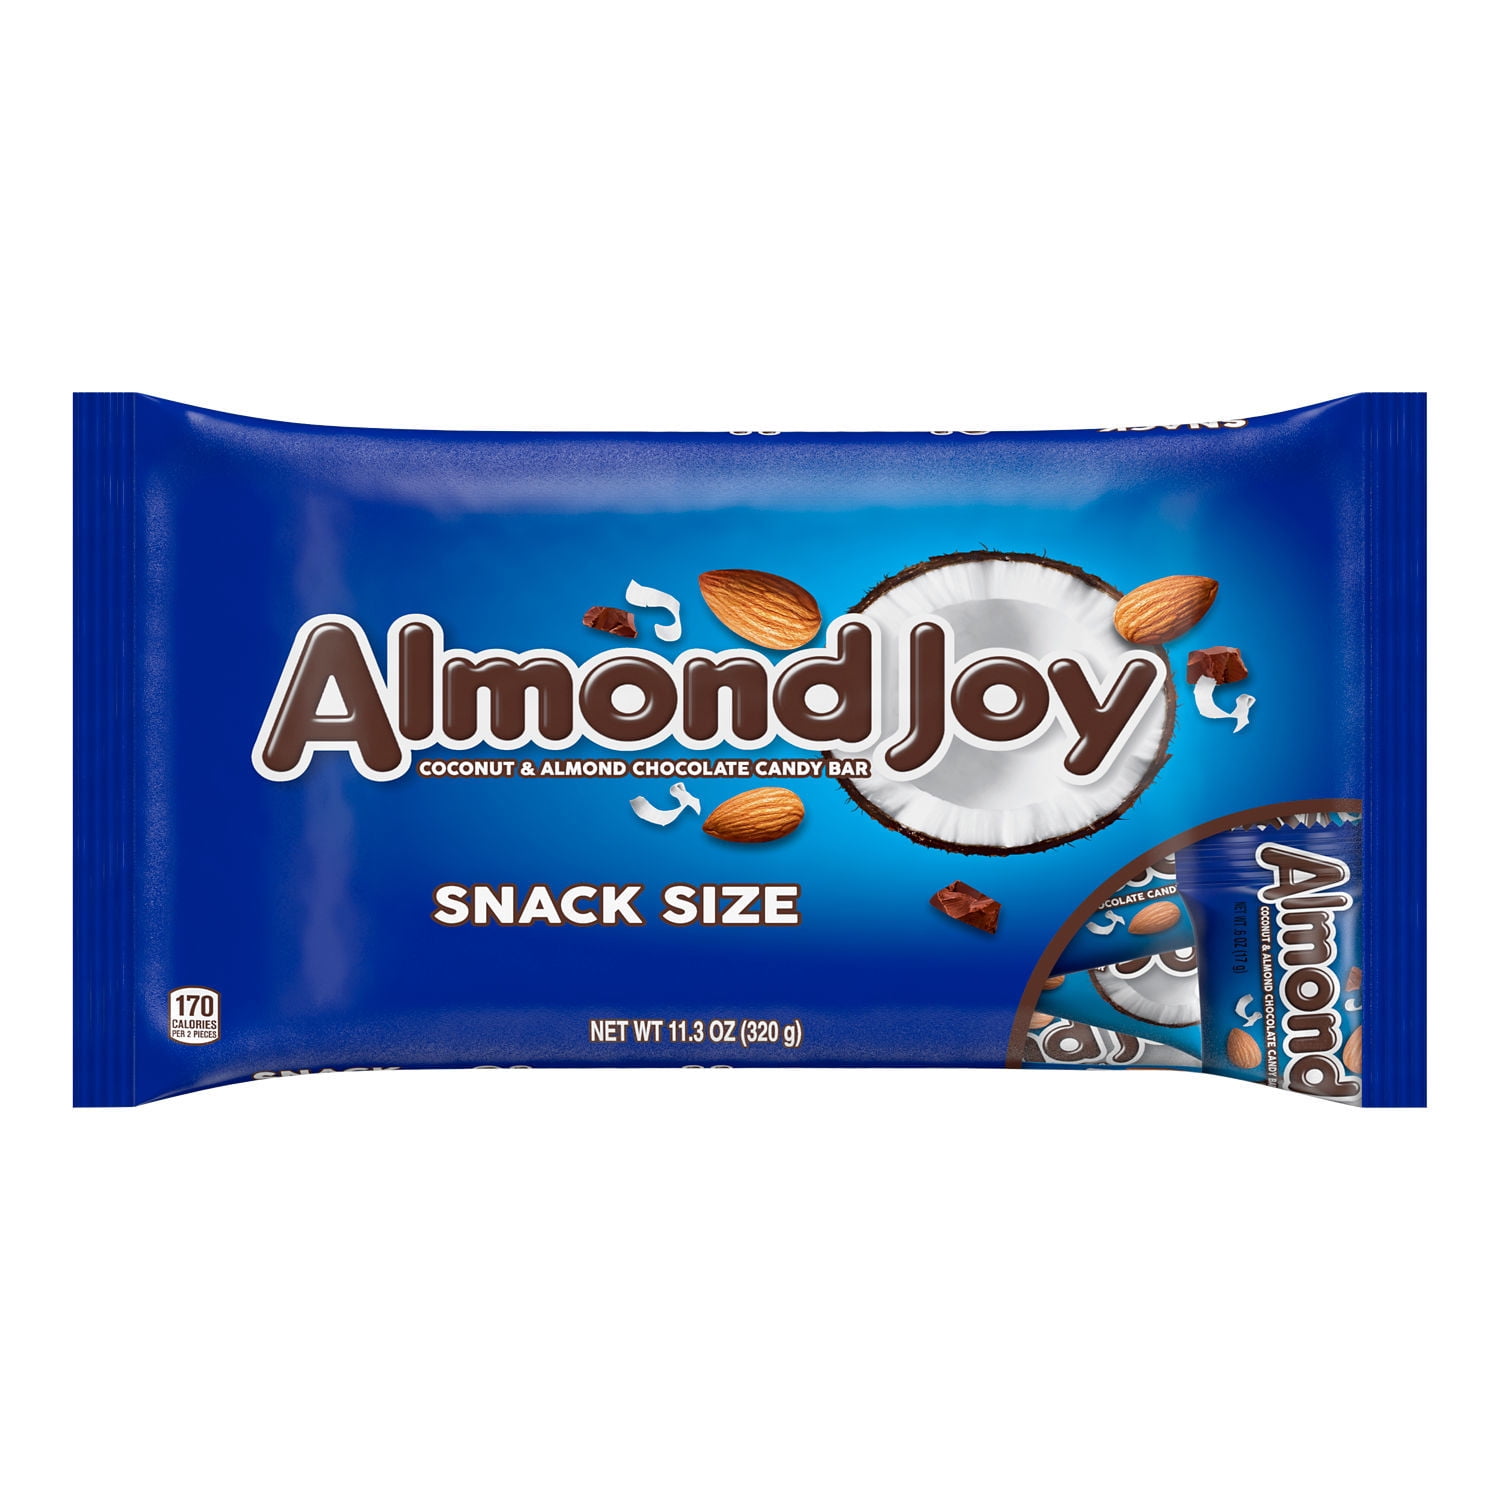 ALMOND JOY Coconut and Almond Chocolate Snack Size, Gluten Free, Individually Wrapped Candy Bag, 11.3 oz